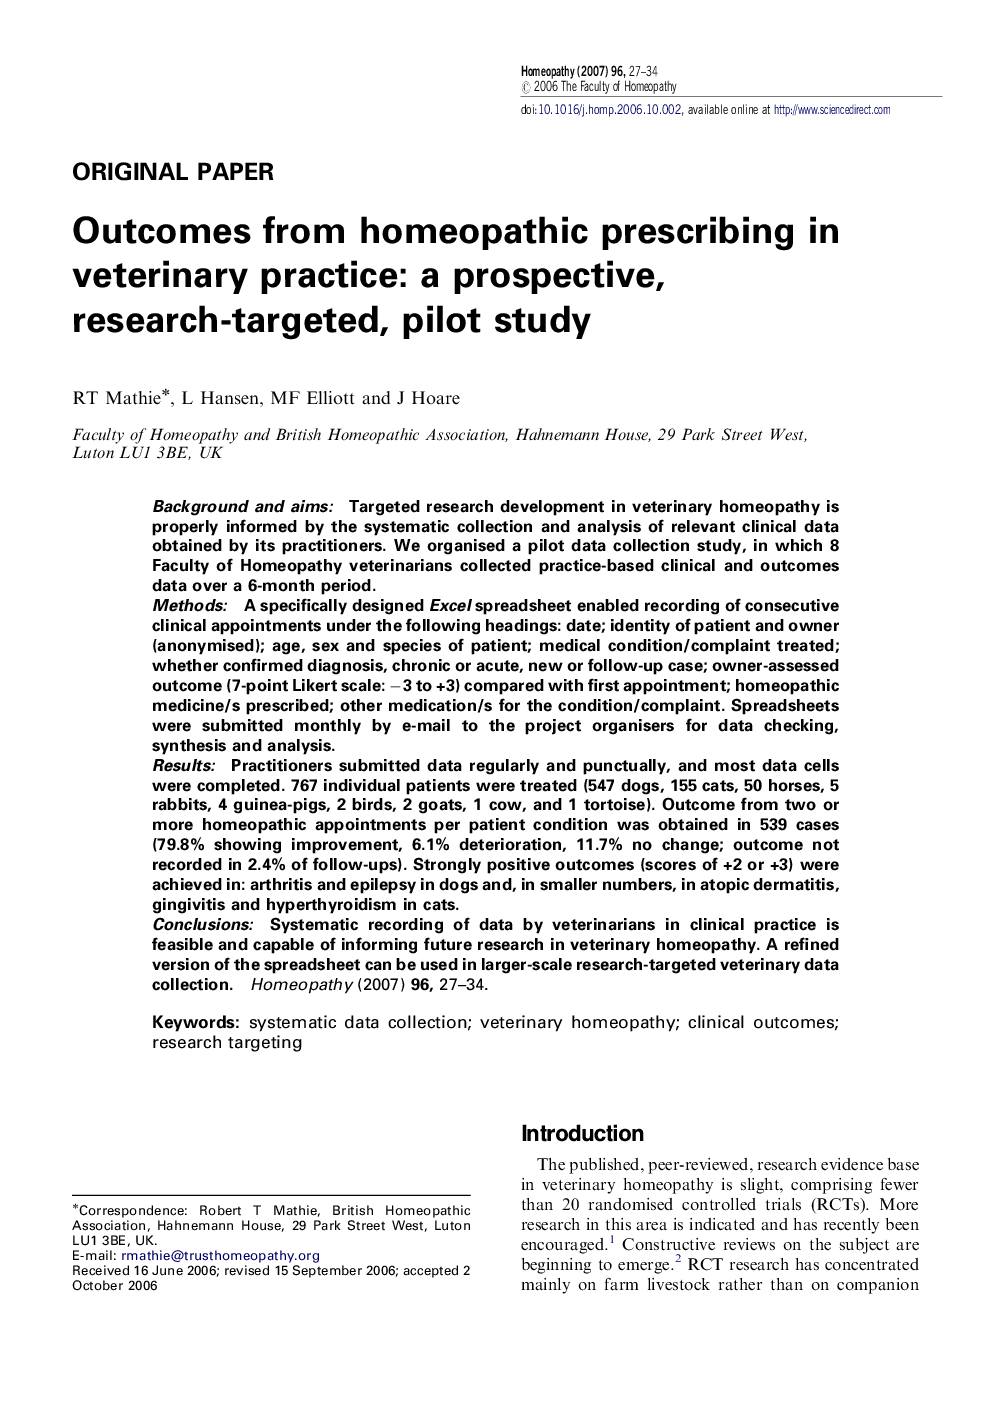 Outcomes from homeopathic prescribing in veterinary practice: a prospective, research-targeted, pilot study